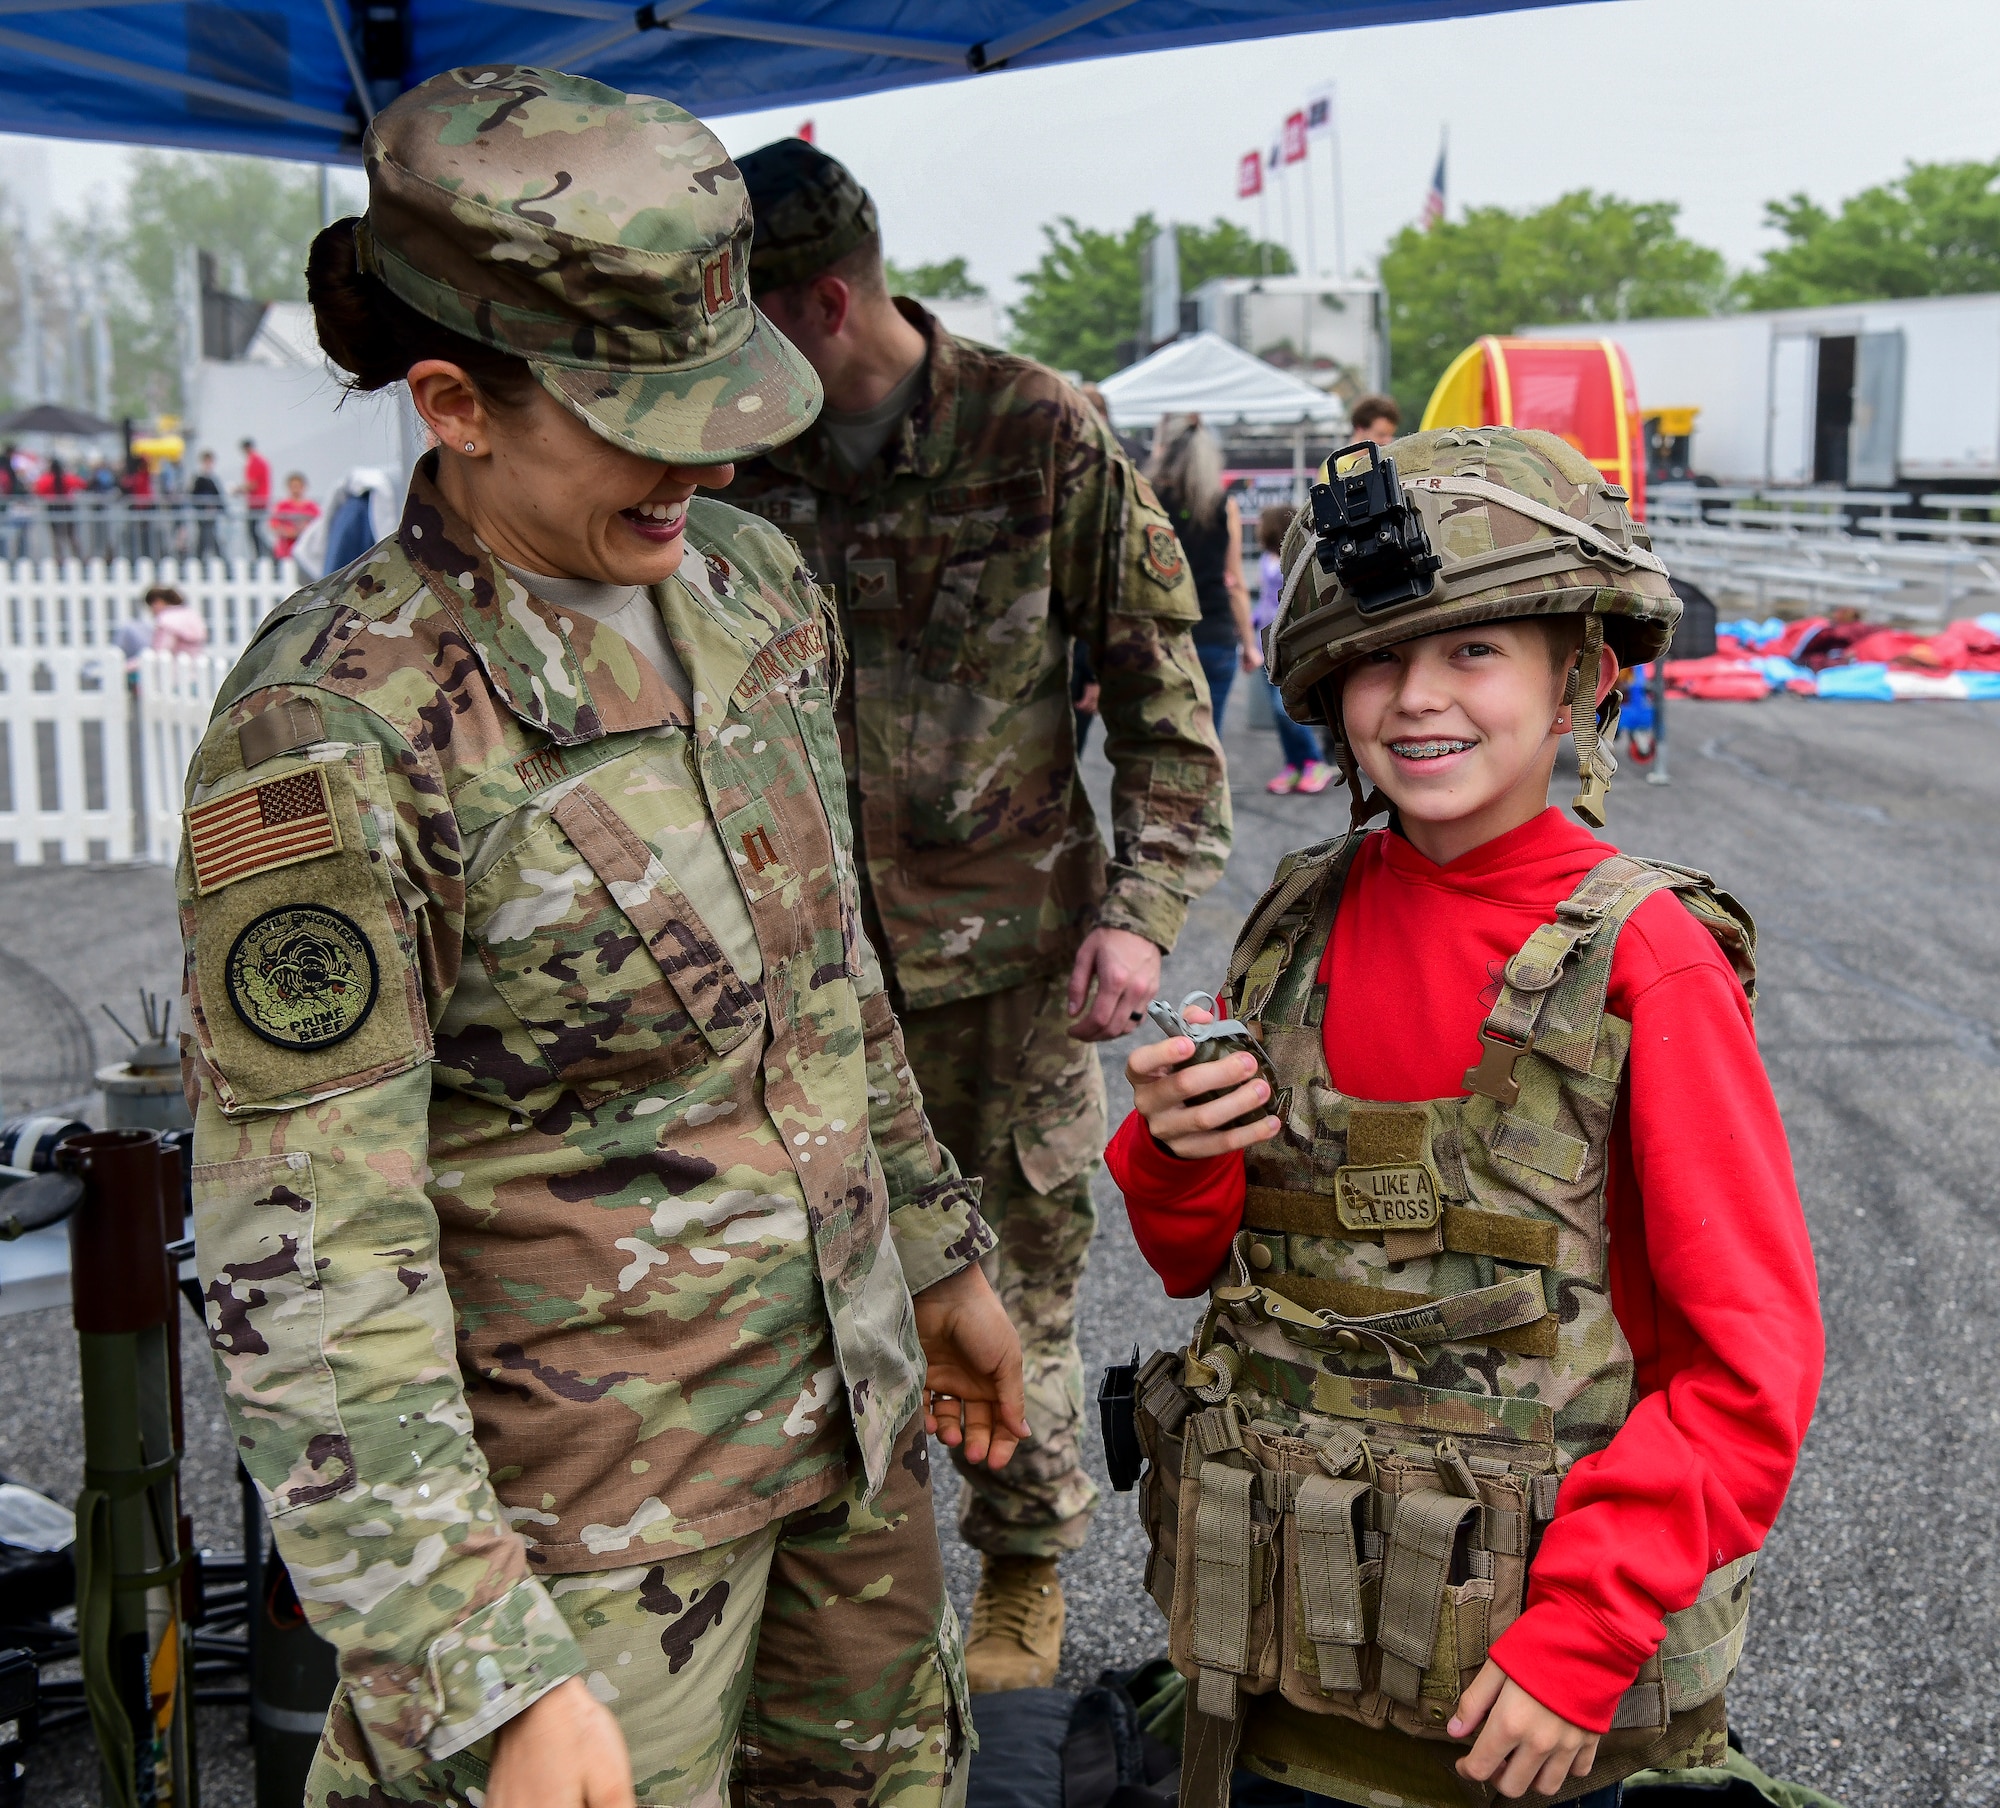 Capt. Michelle Petry, 436th Civil Engineer Squadron Explosive Ordnance Disposal flight commander, helps Reagan Fesel don military gear May 4, 2019, at Dover International Speedway, Dover, Del. The EOD technicians, firefighters, and Security Forces Squadron members set up static displays to provide a hands-on experience to those attending the races.  (U.S. Air Force photo by Senior Airman Christopher Quail)